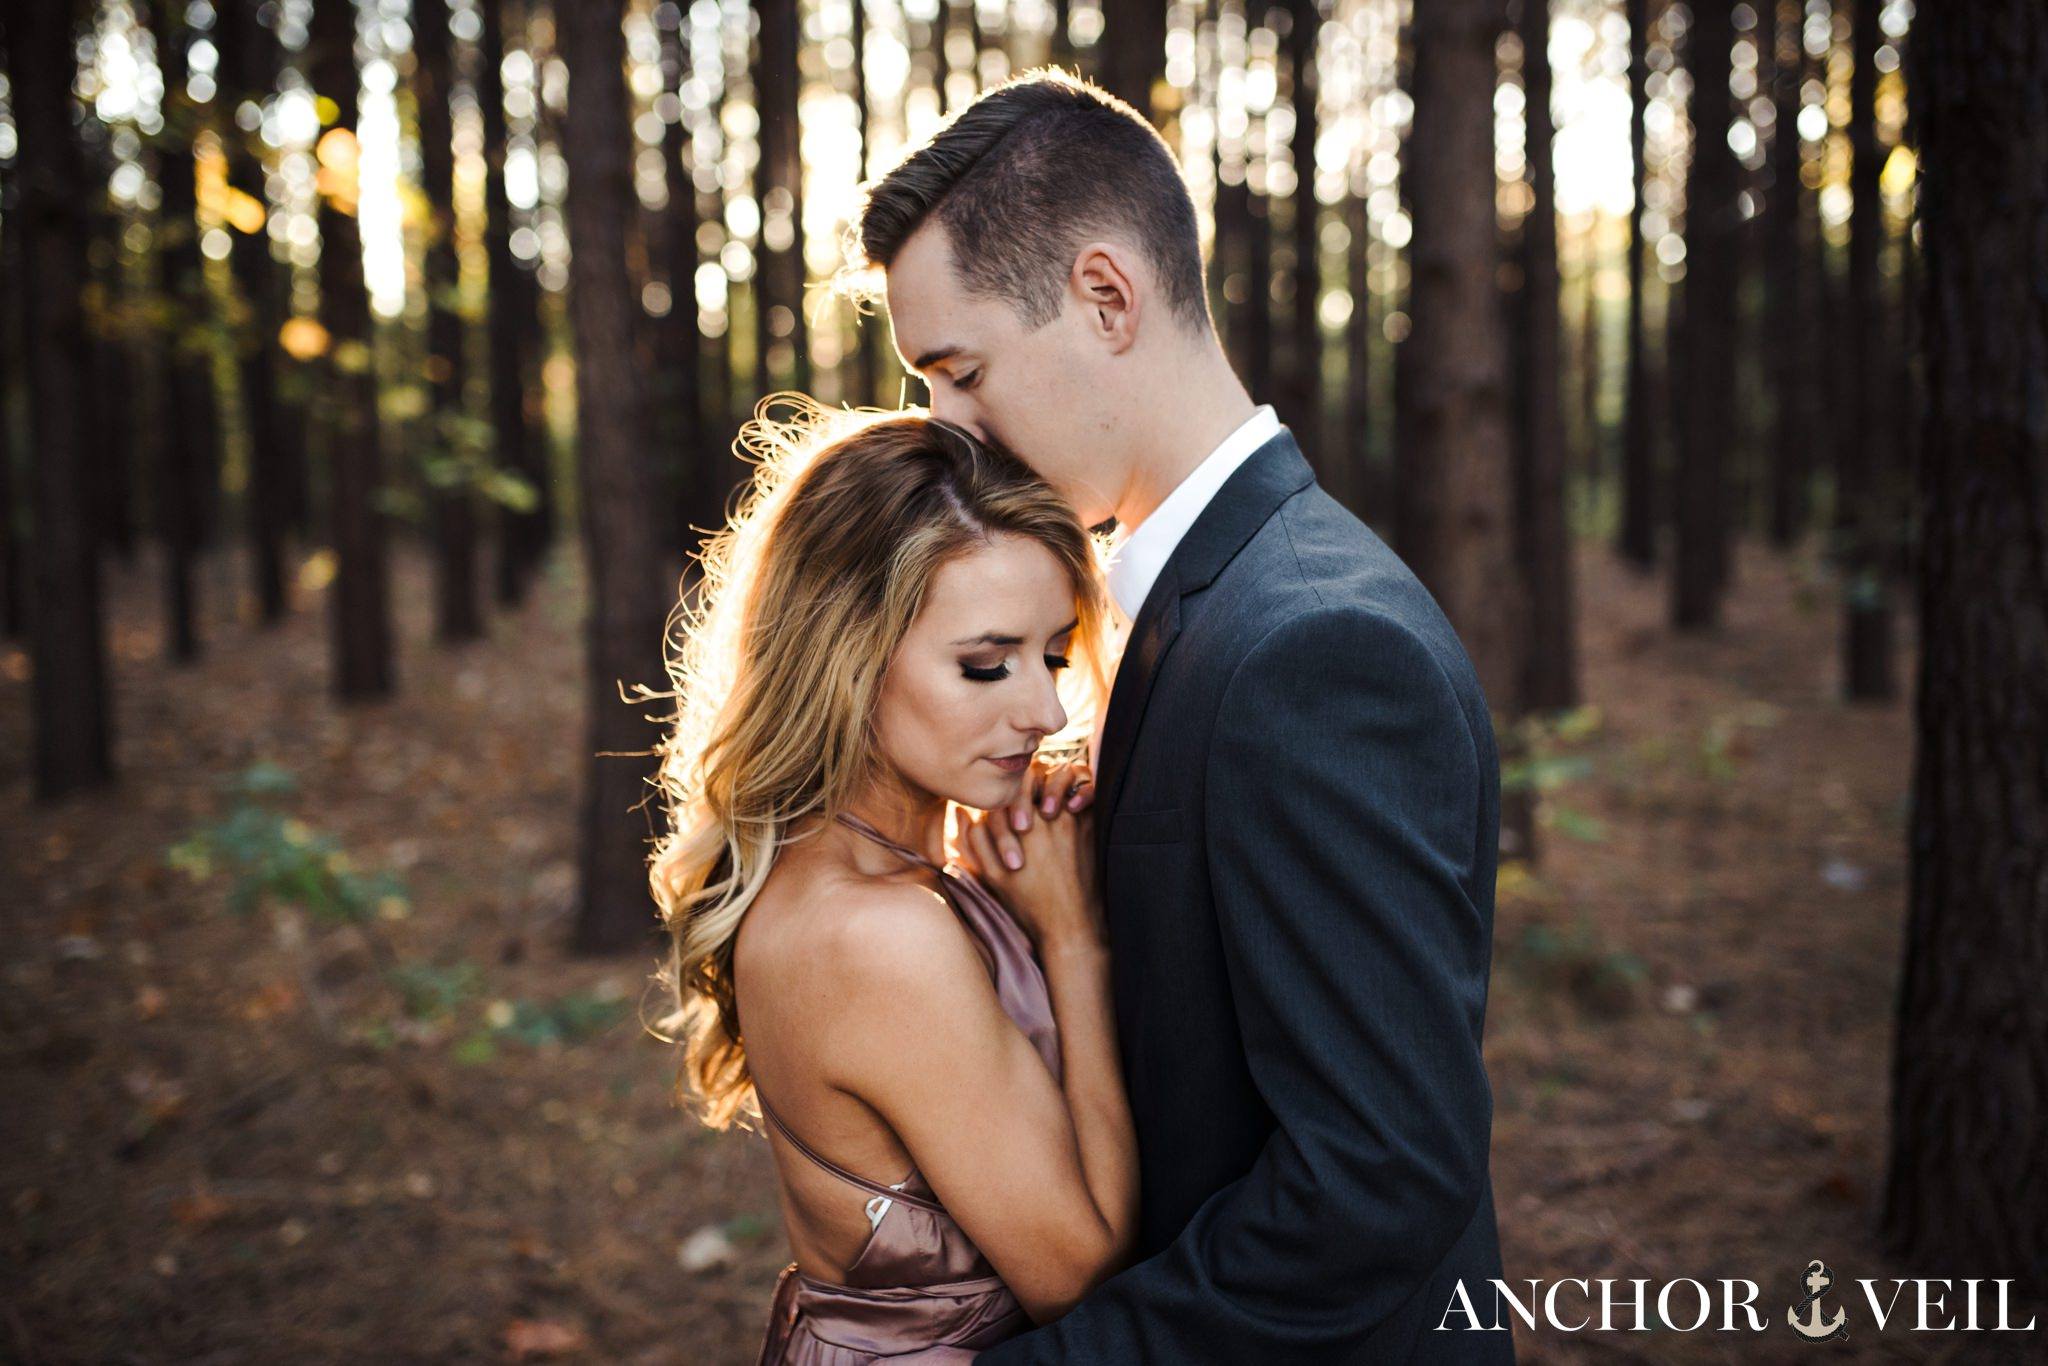 kissing her in the tree forest during their charlotte engagement session